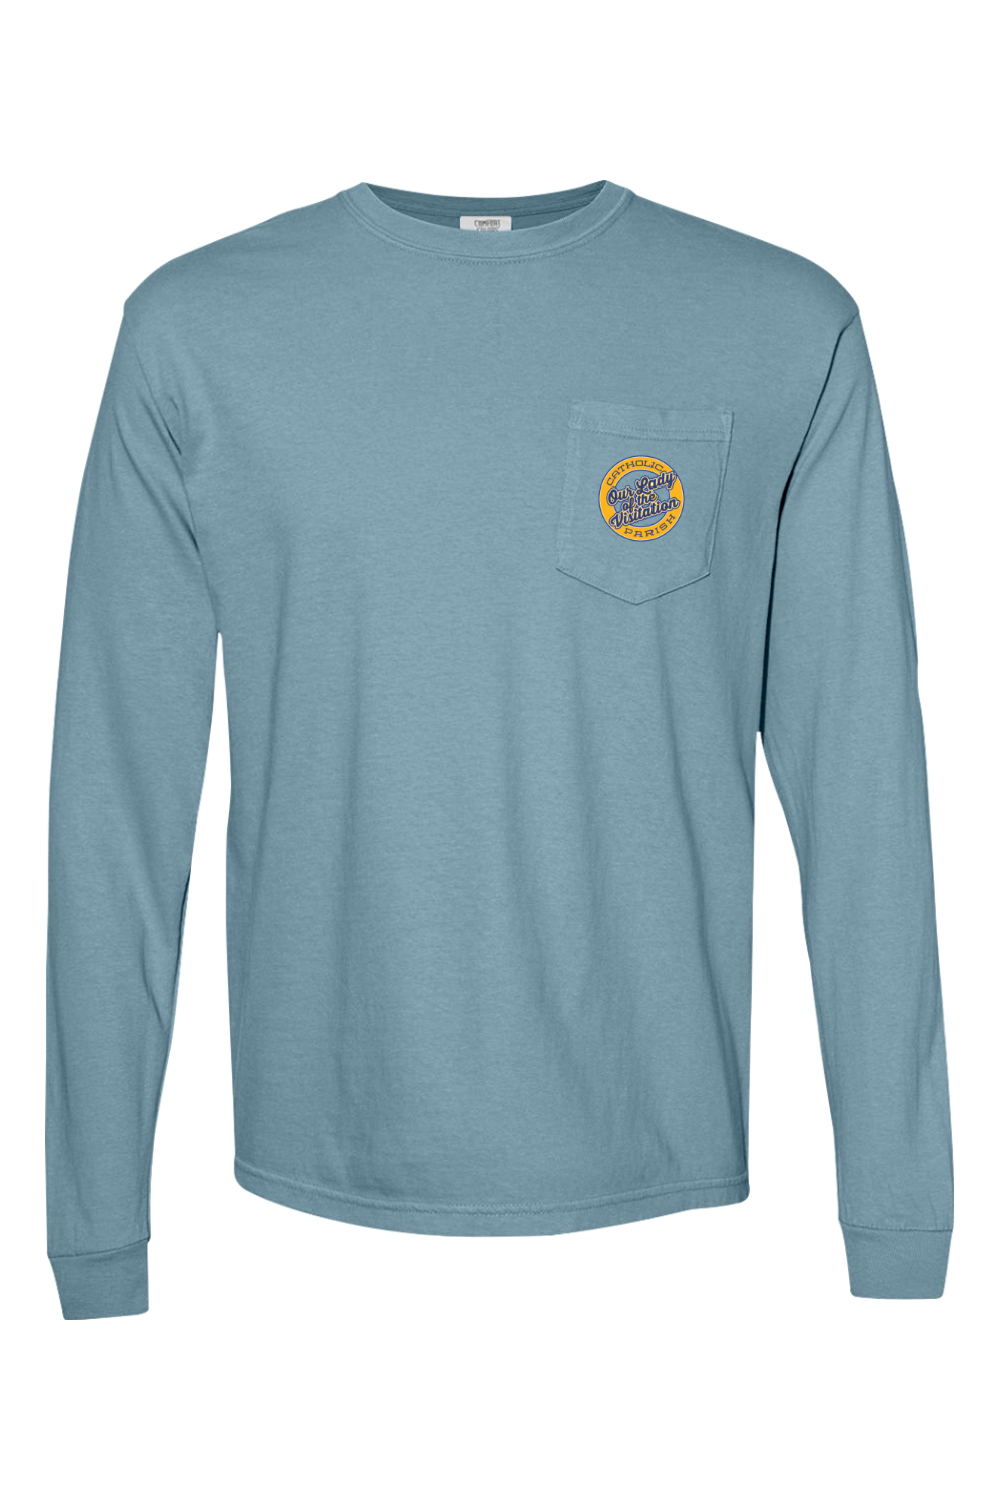 Our Lady of the Visitation Circle Pocket Long Sleeve